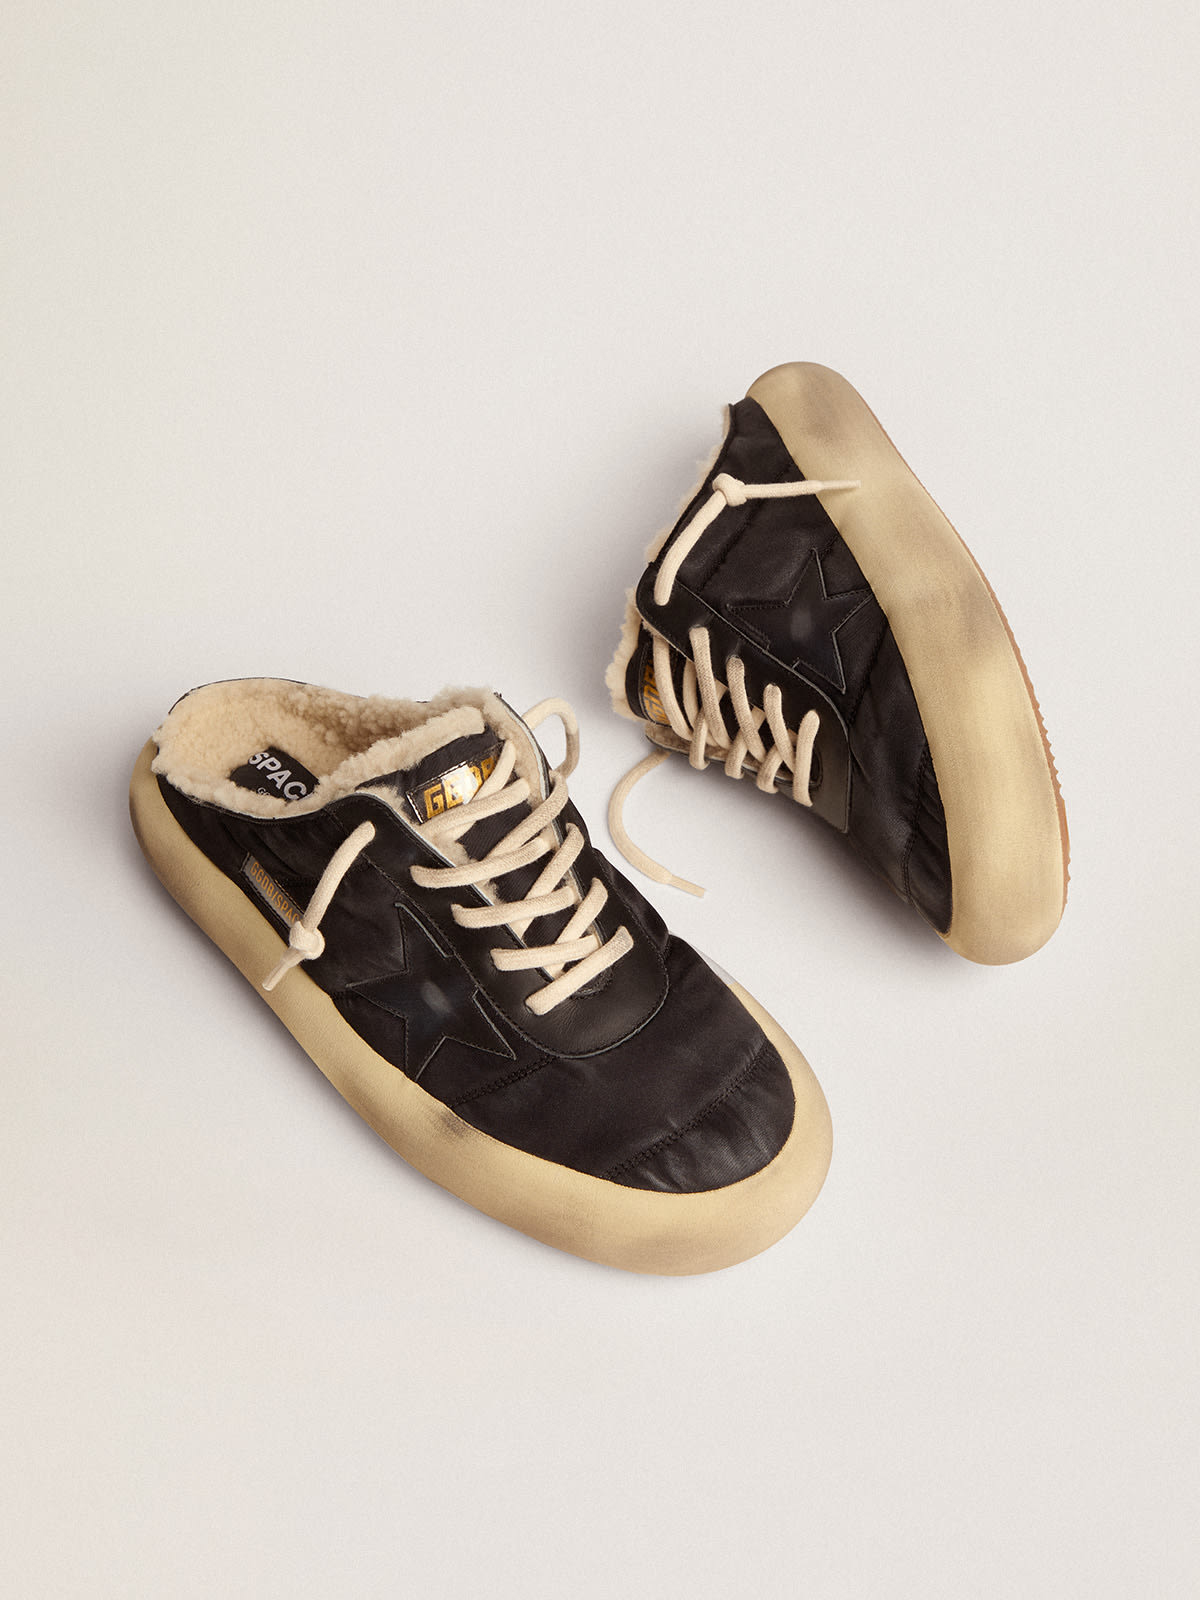 Golden Goose - Men's Space-Star Sabot shoes in quilted black nylon with shearling lining in 